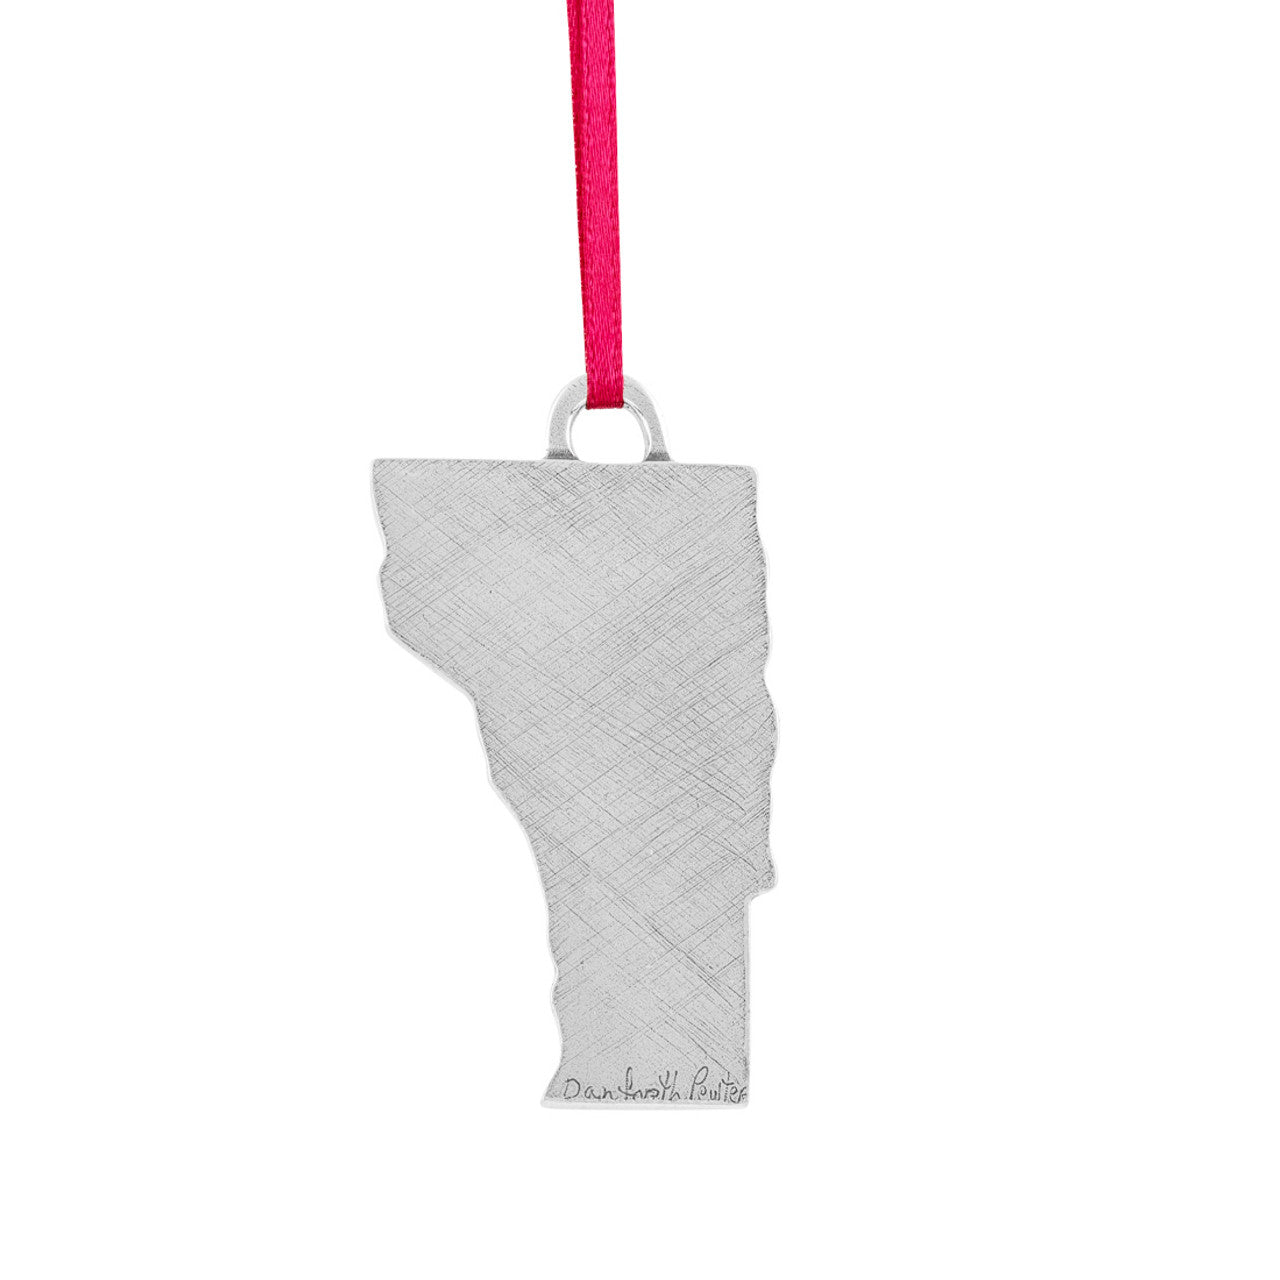 Vermont Carded Ornament